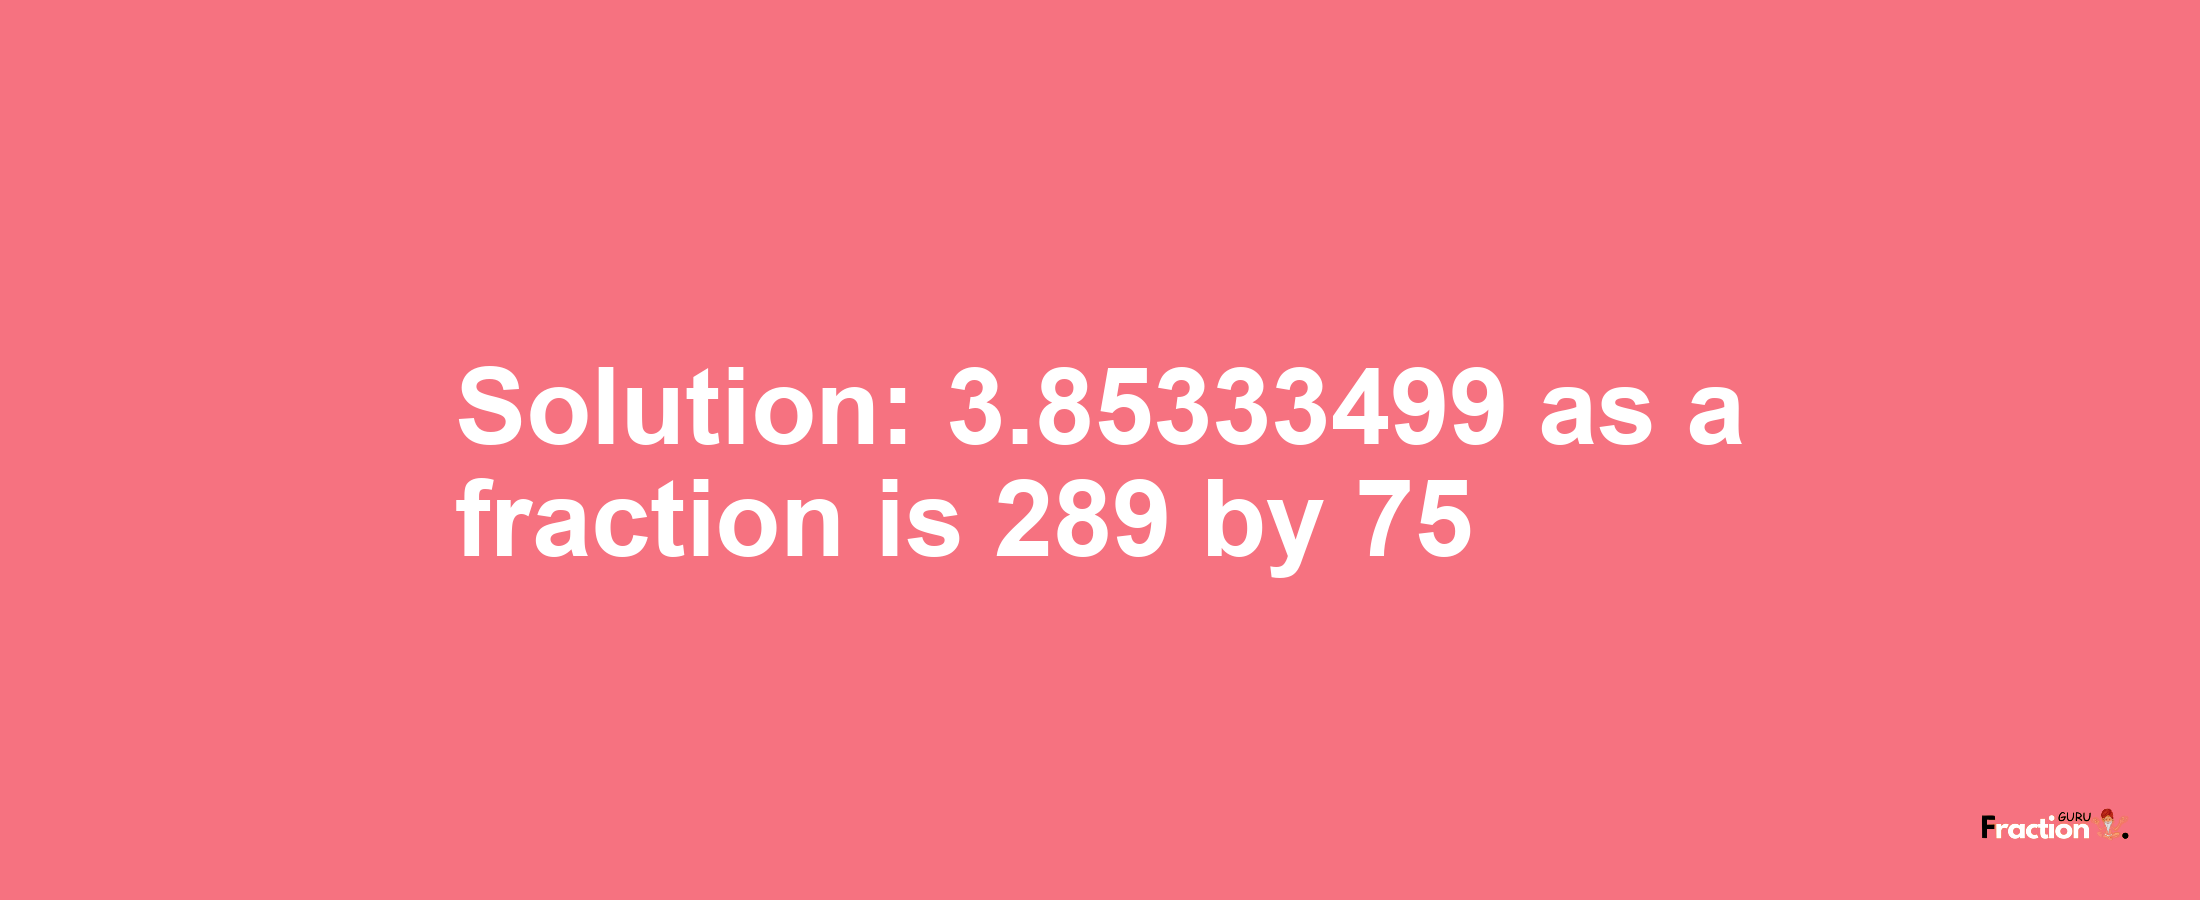 Solution:3.85333499 as a fraction is 289/75